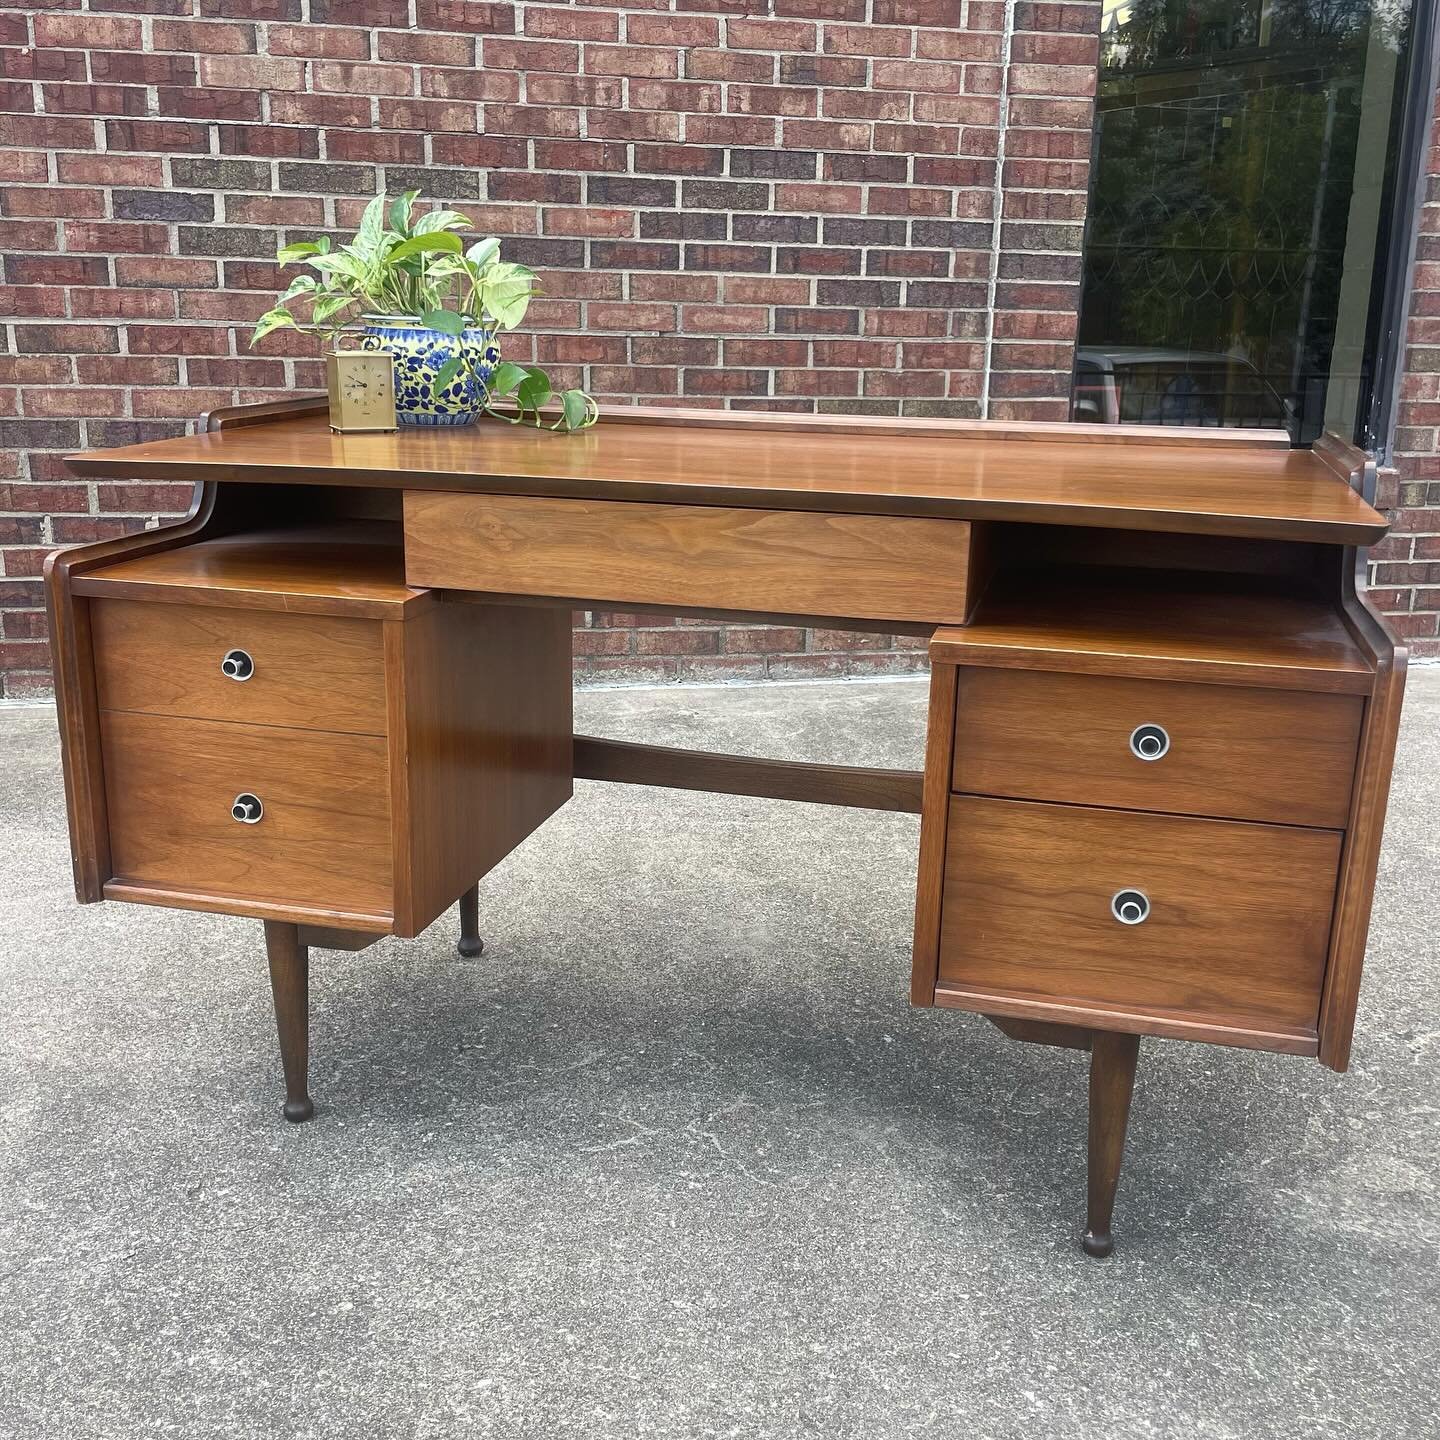 Take my breath away! 1960s American walnut mainline floating desk by Hooker. Deep drawers for plenty of storage and black and chrome knobs 31&rdquo; tall 50&rdquo; wide 26&rdquo; deep $1100. Swiza and Carriage golden clock $40.